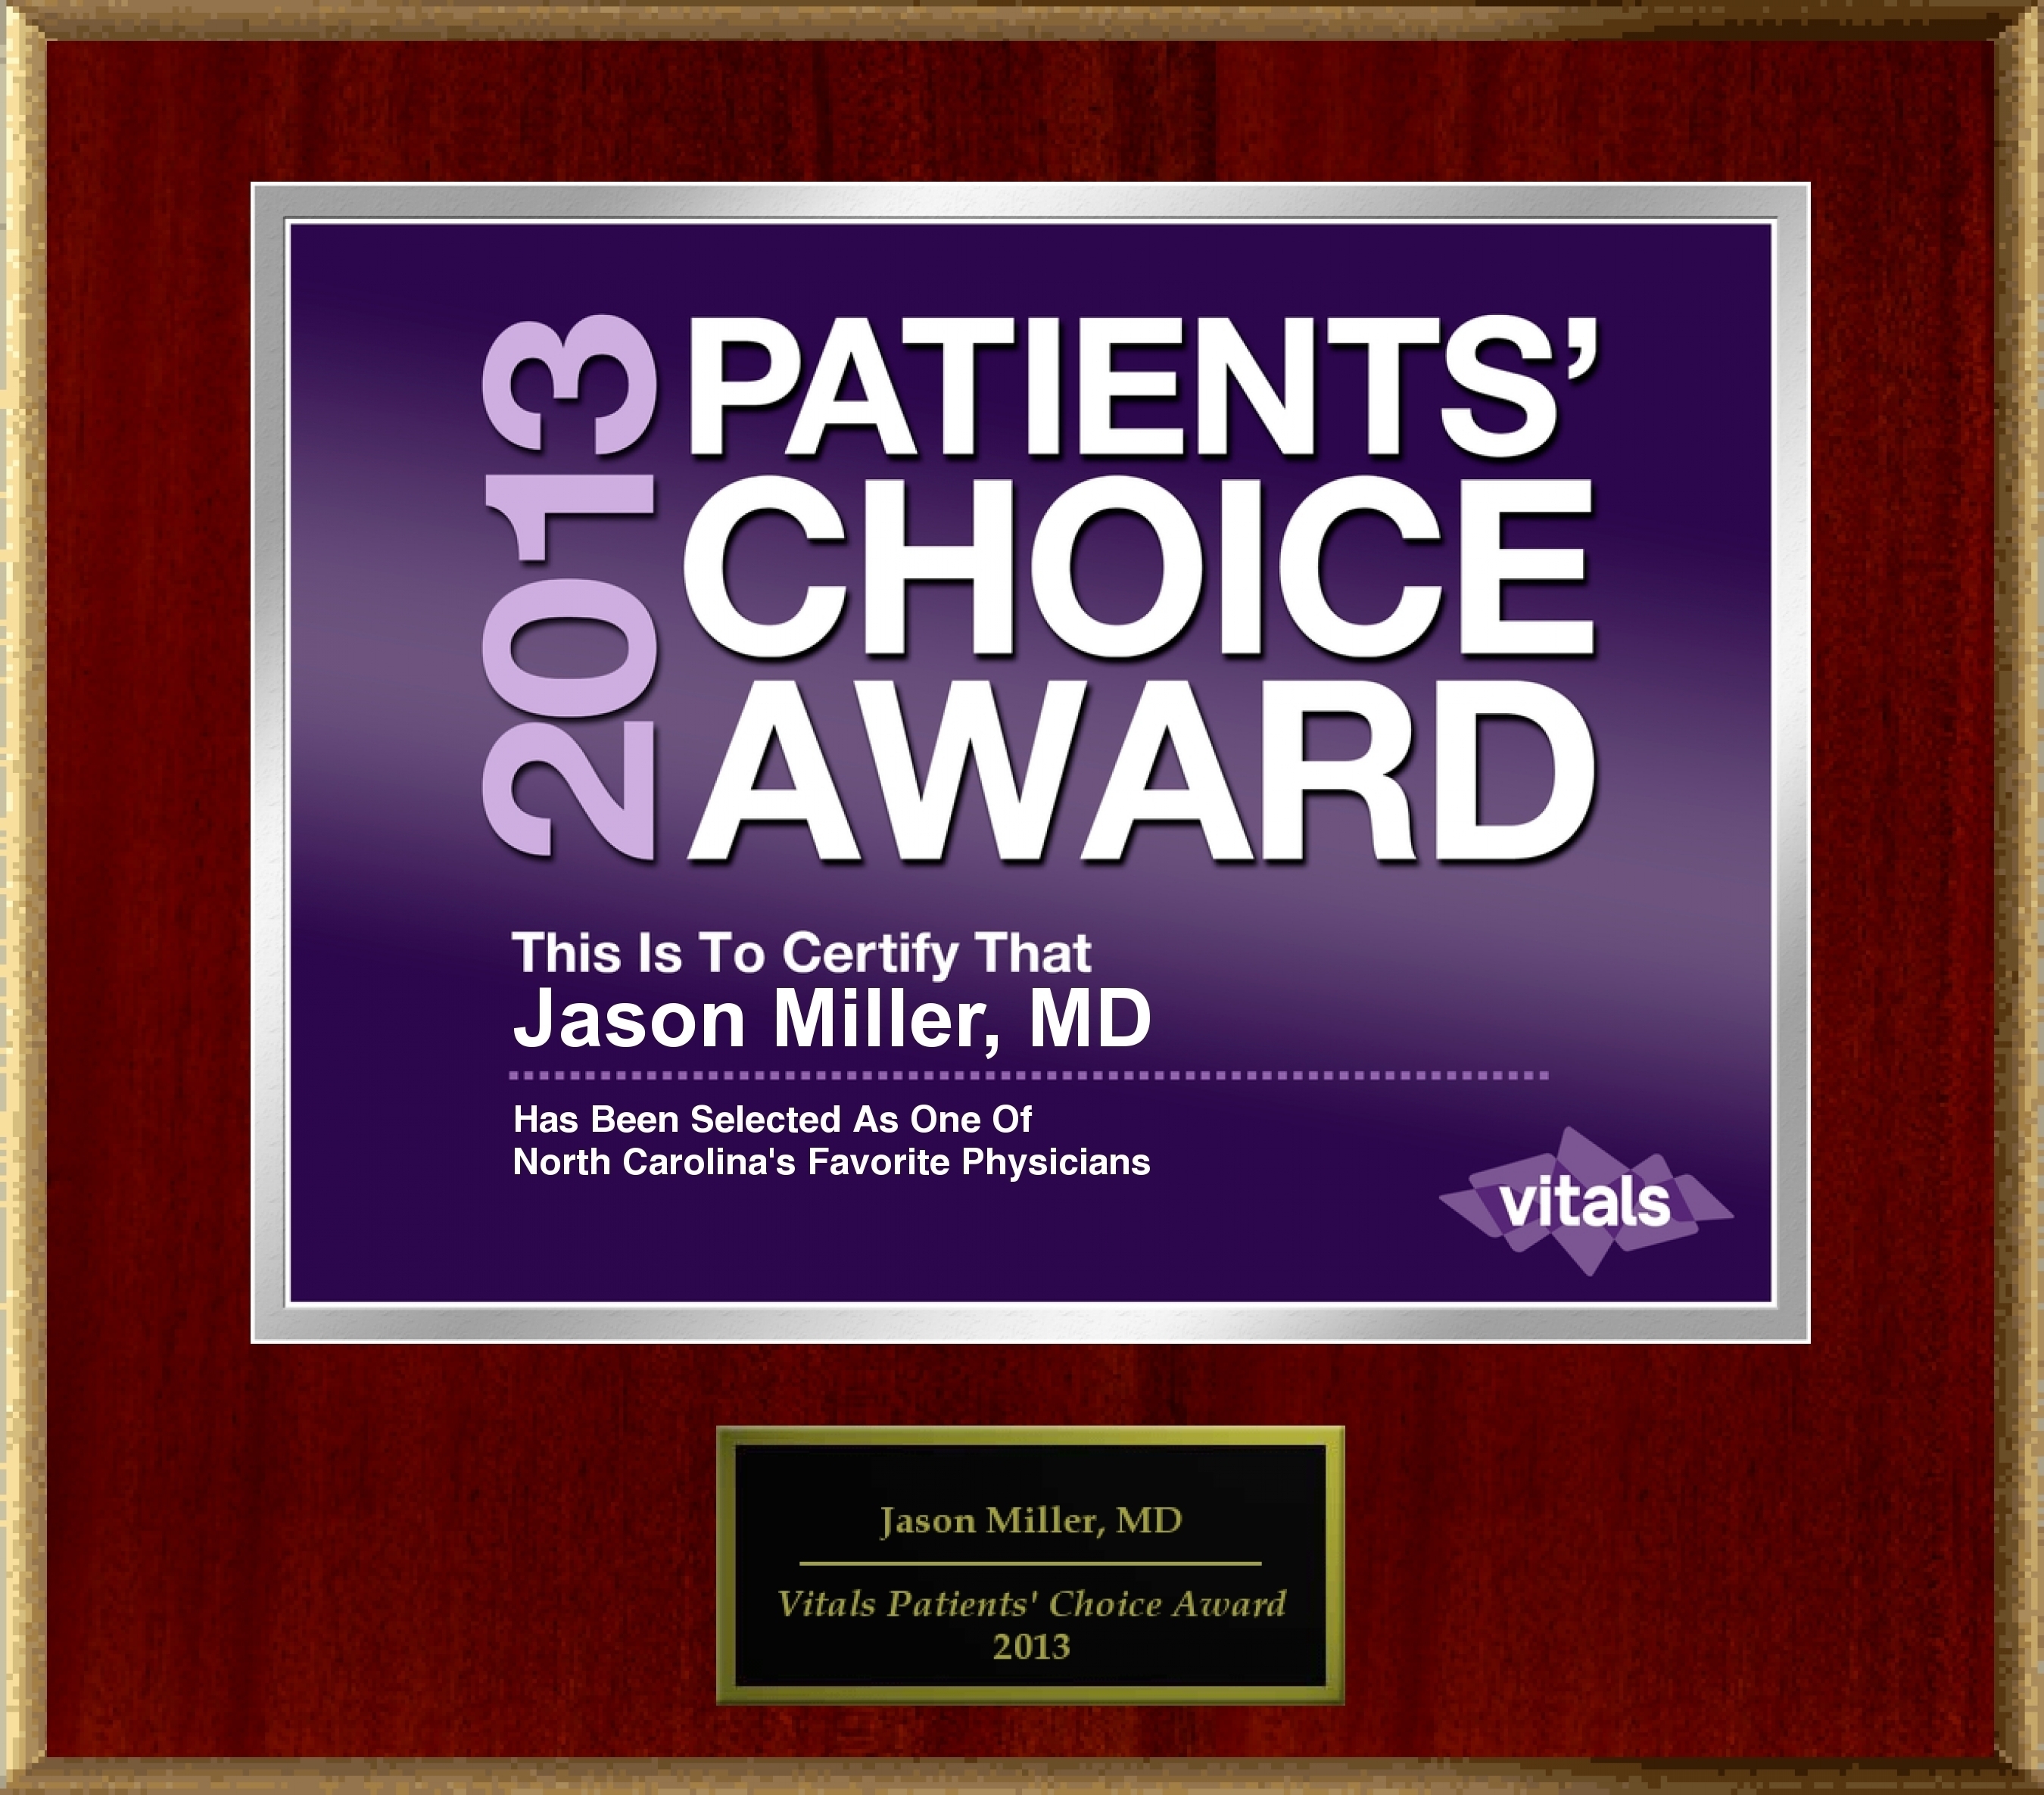 Dr. Jason Miller of Raleigh-Durham, NC Named a Patients' Choice Award Winner for 2013 (PRNewsFoto/American Registry)